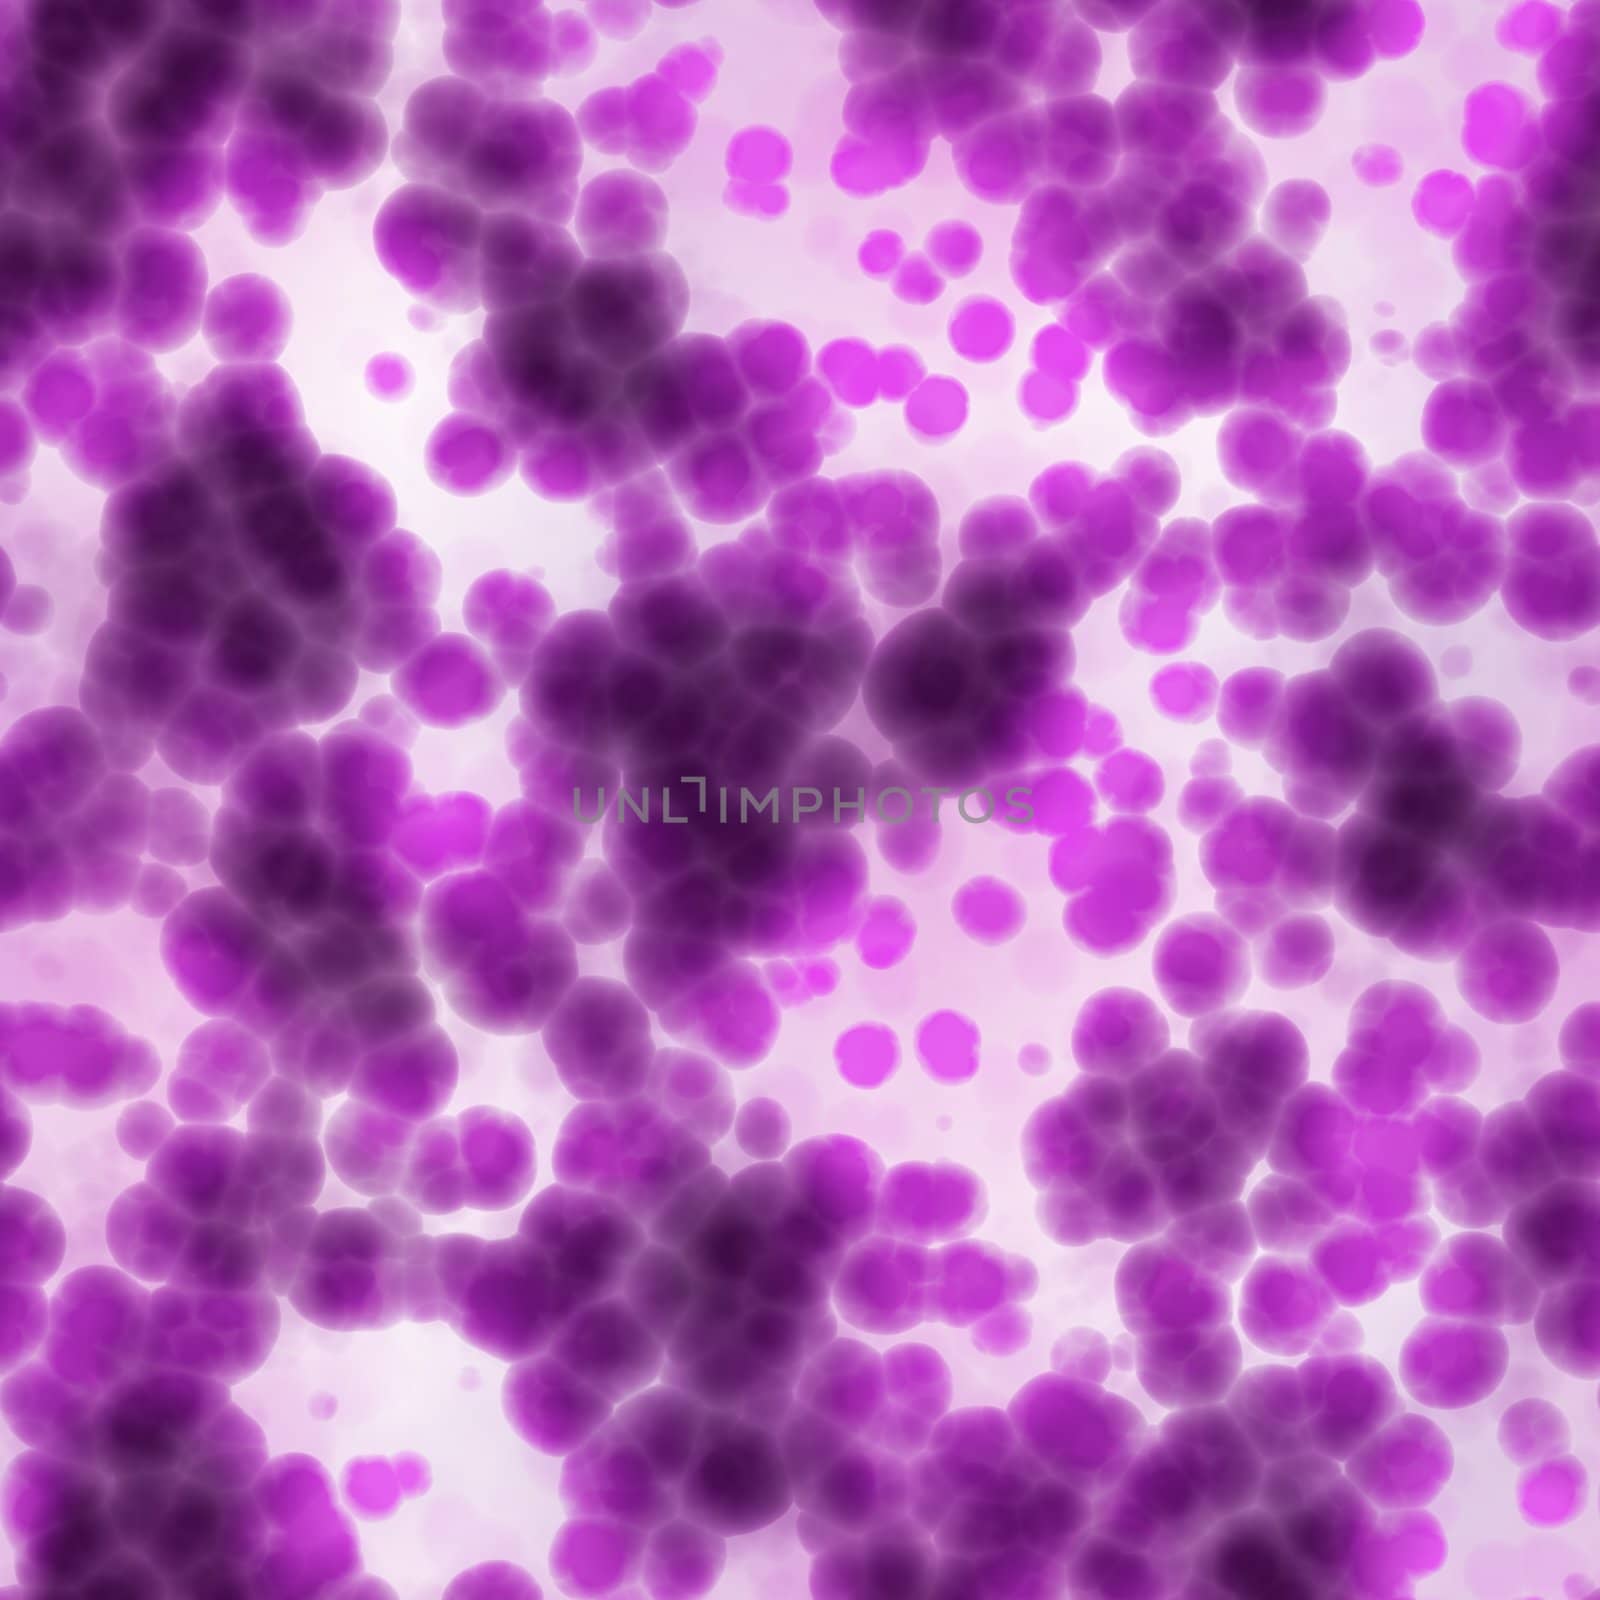 large background image of purple cells on white